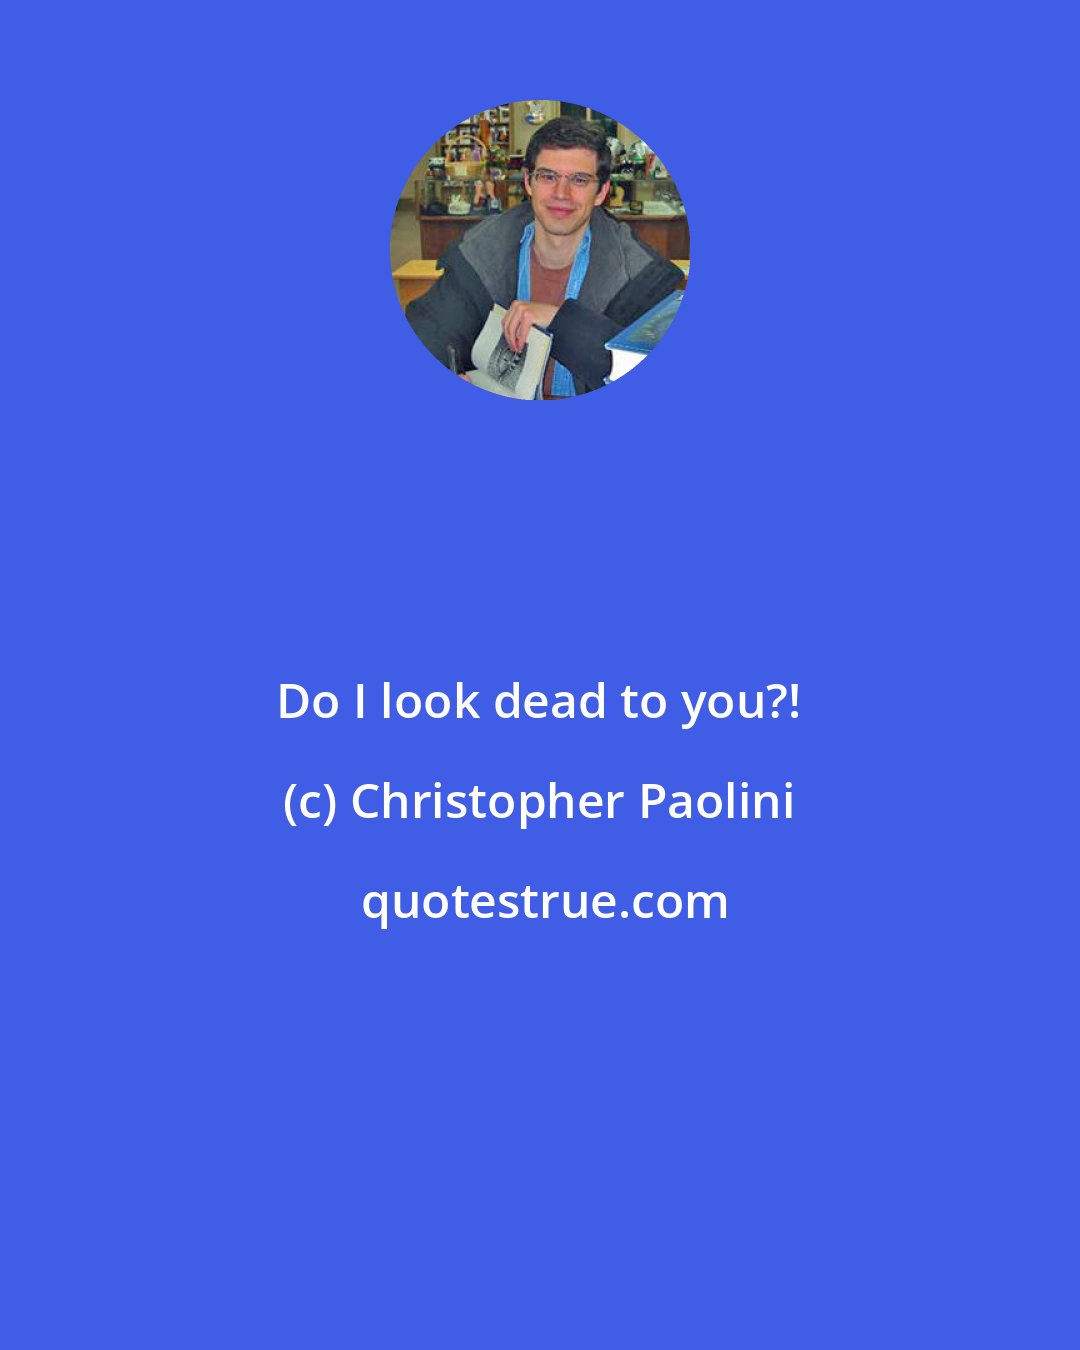 Christopher Paolini: Do I look dead to you?!